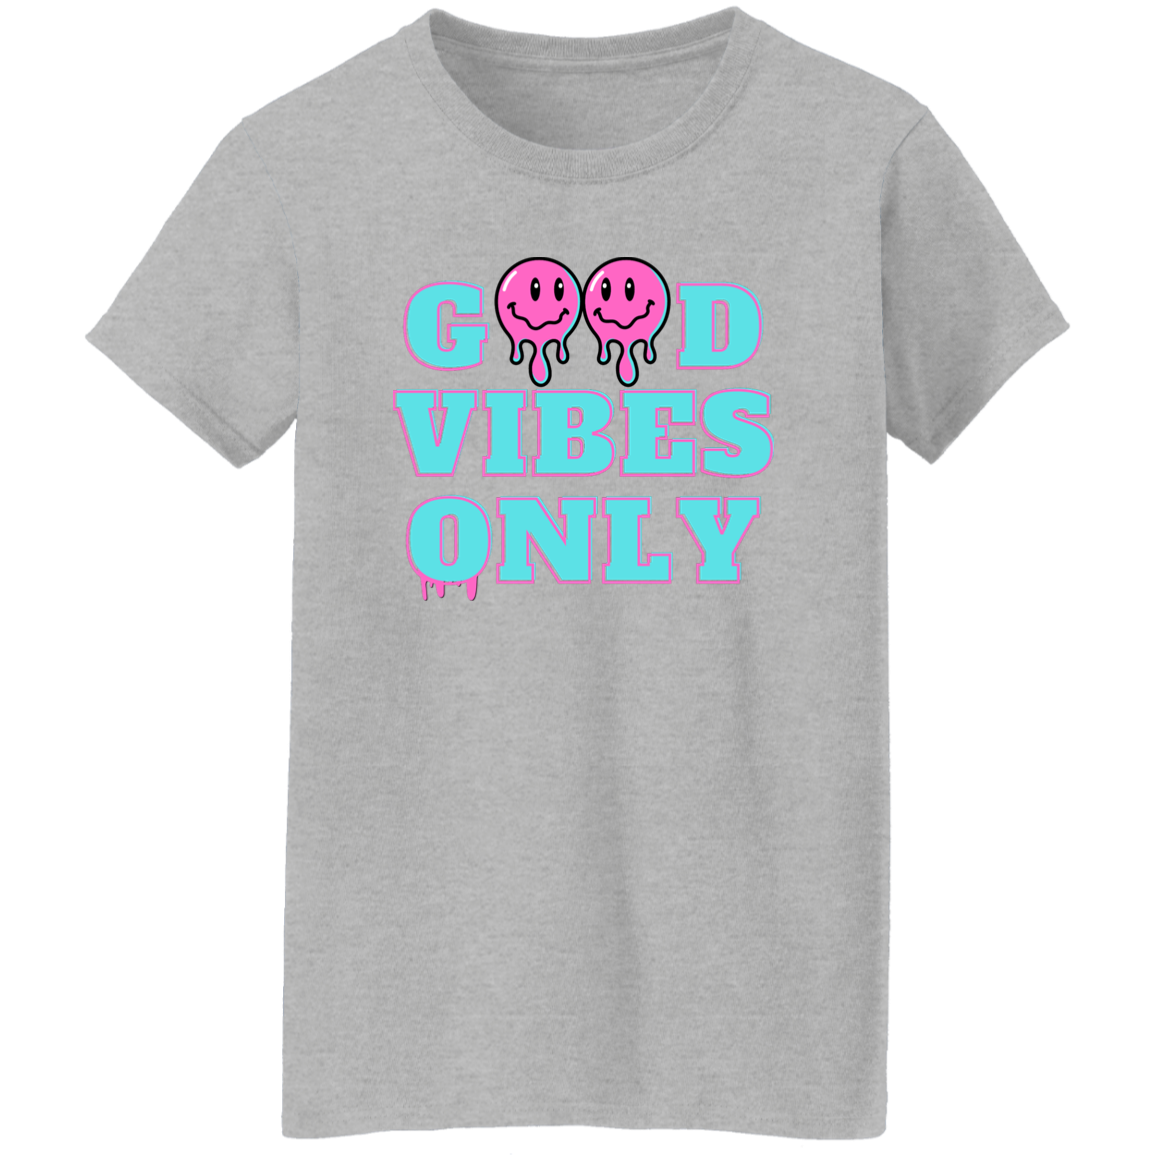 Good Vibes Only - Women's, Ladies' T-Shirt